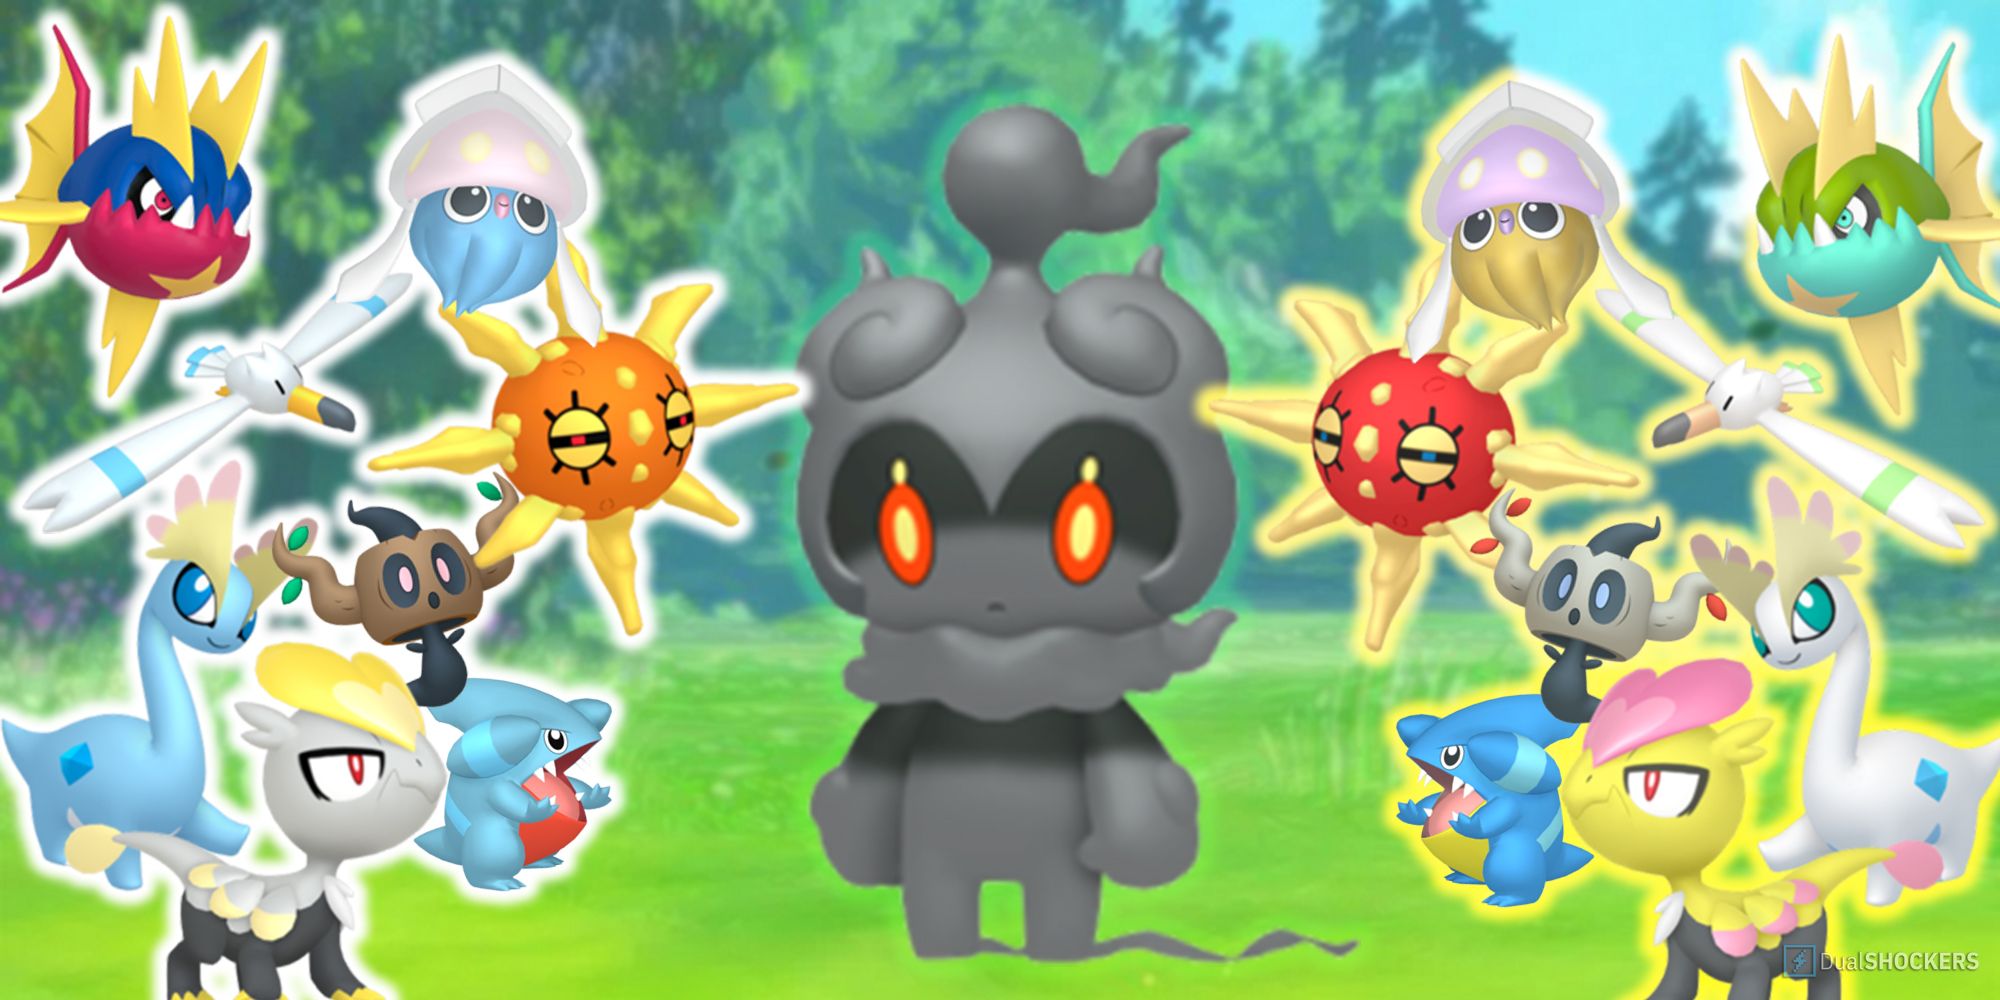 Marshadow in Pokemon GO surrounded by several Pokemon and their shiny forms.